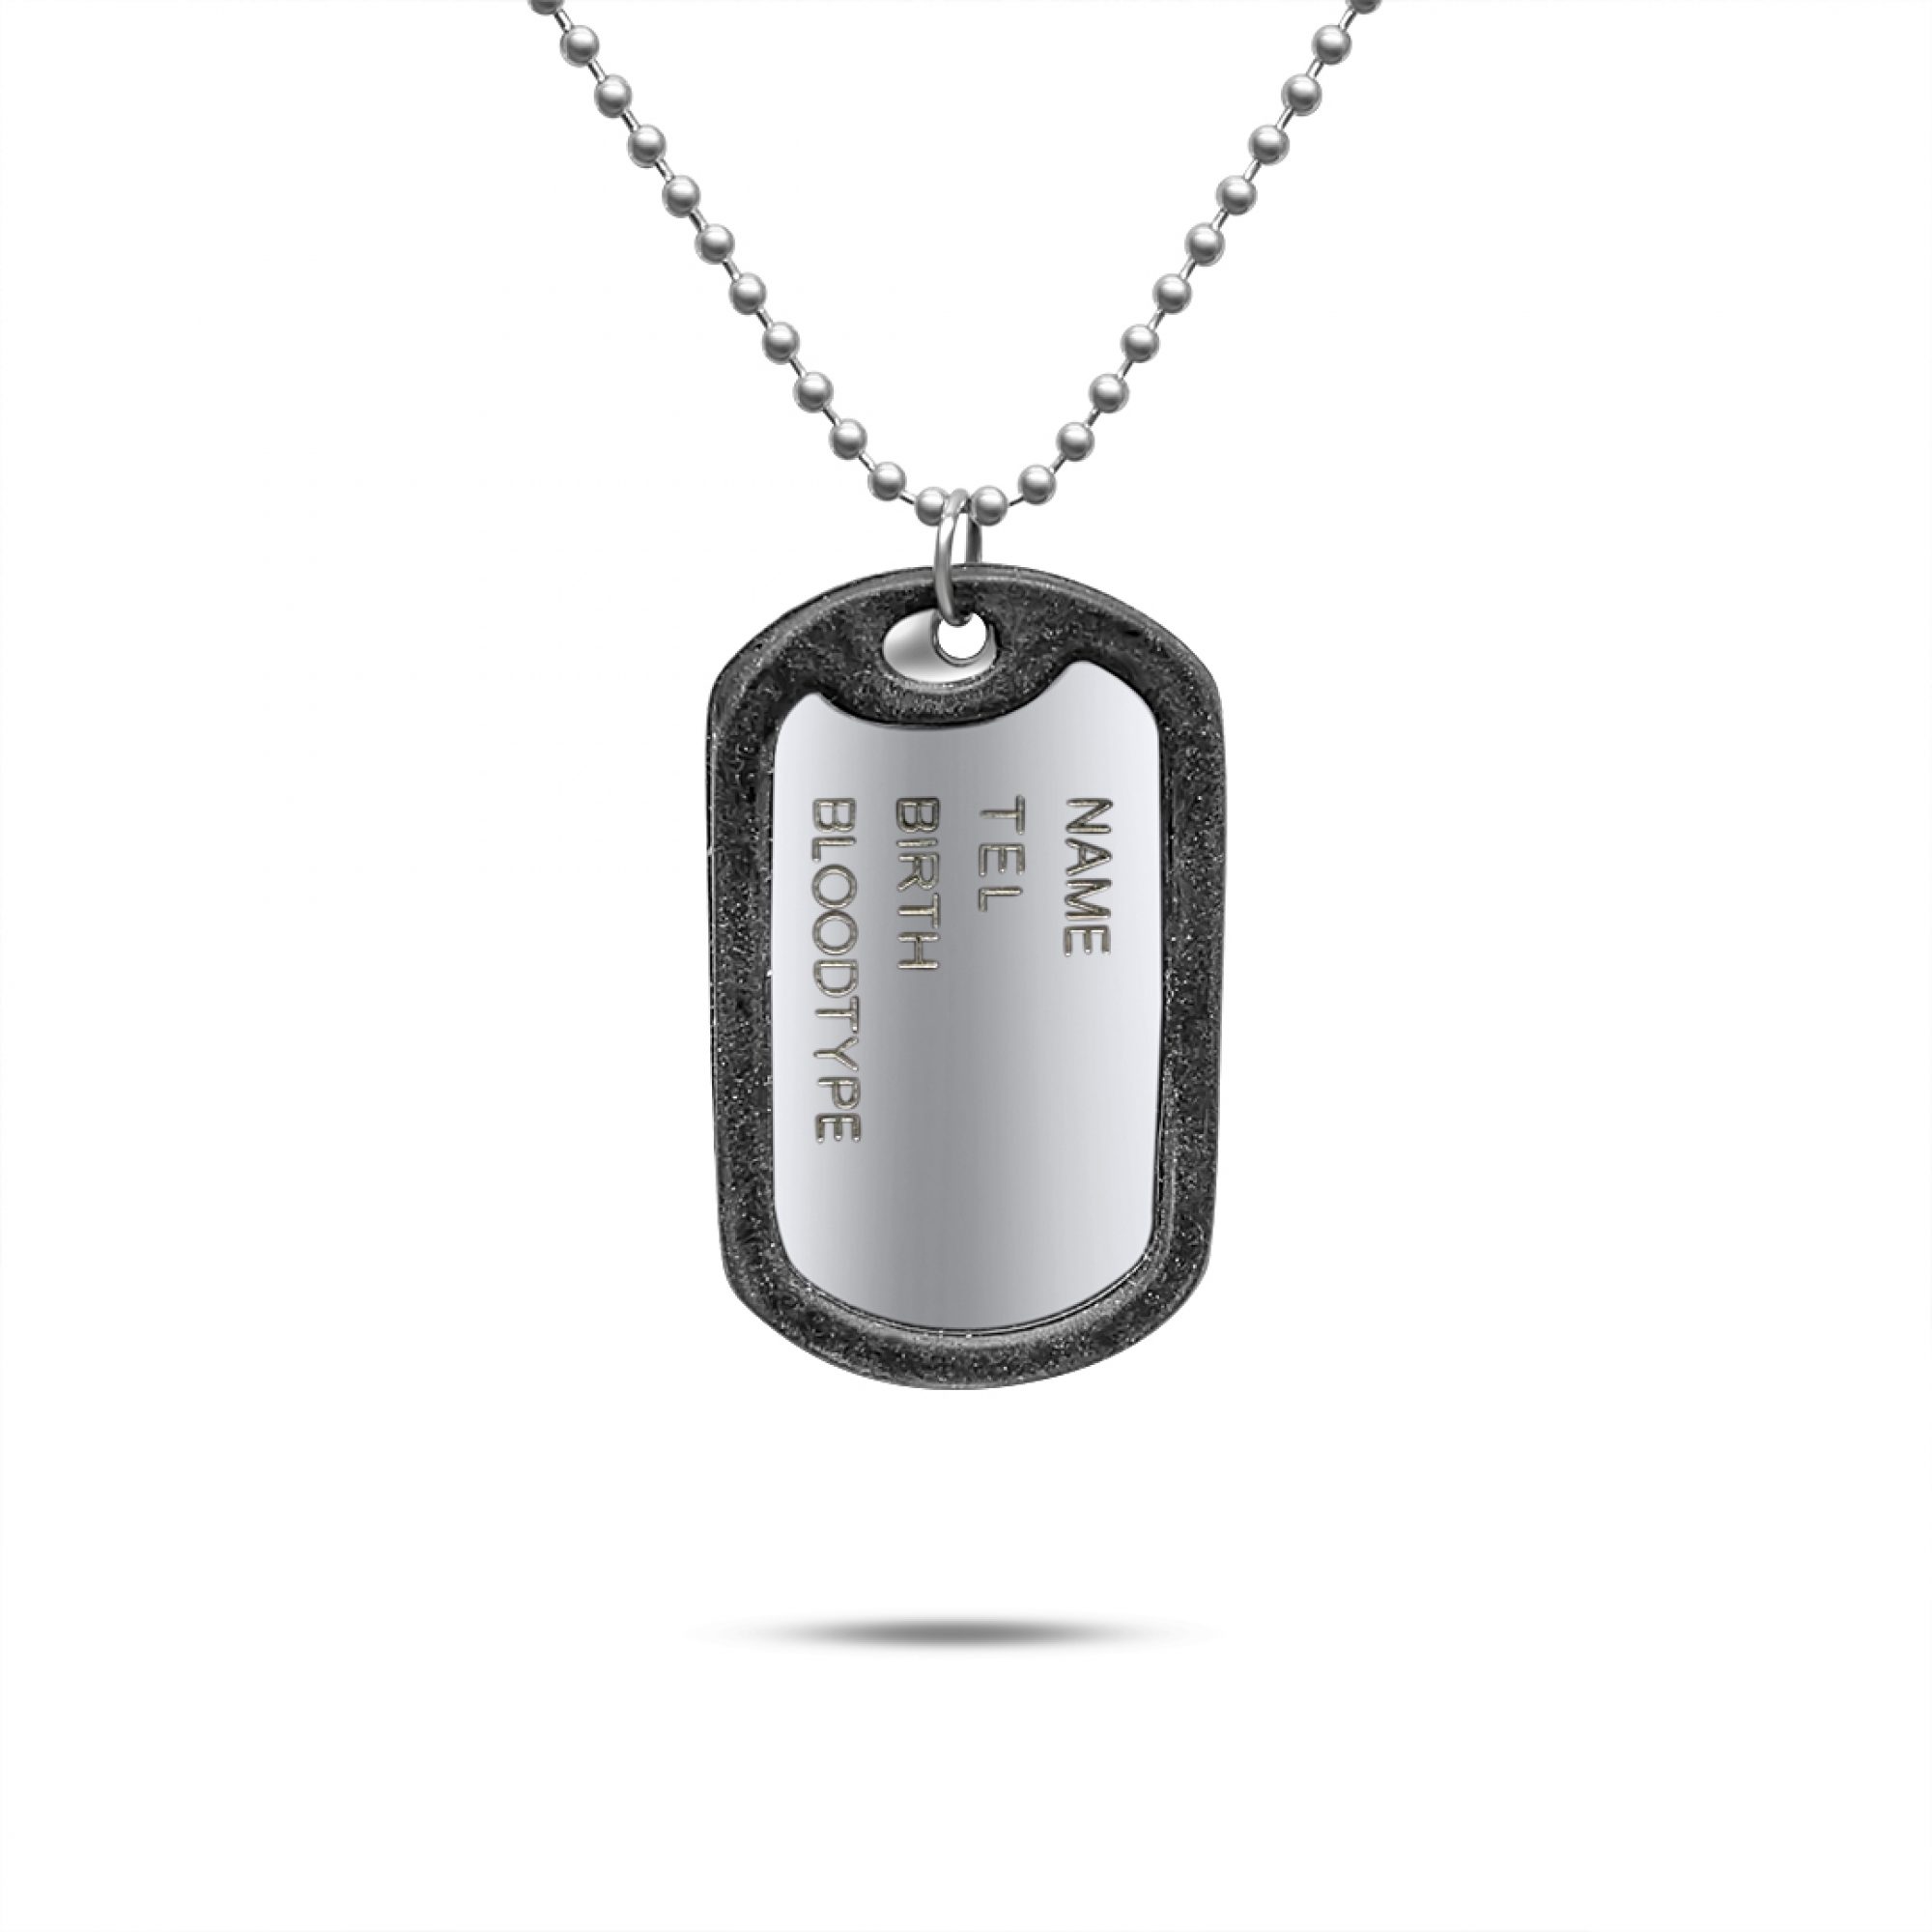 Steel identification tag necklace